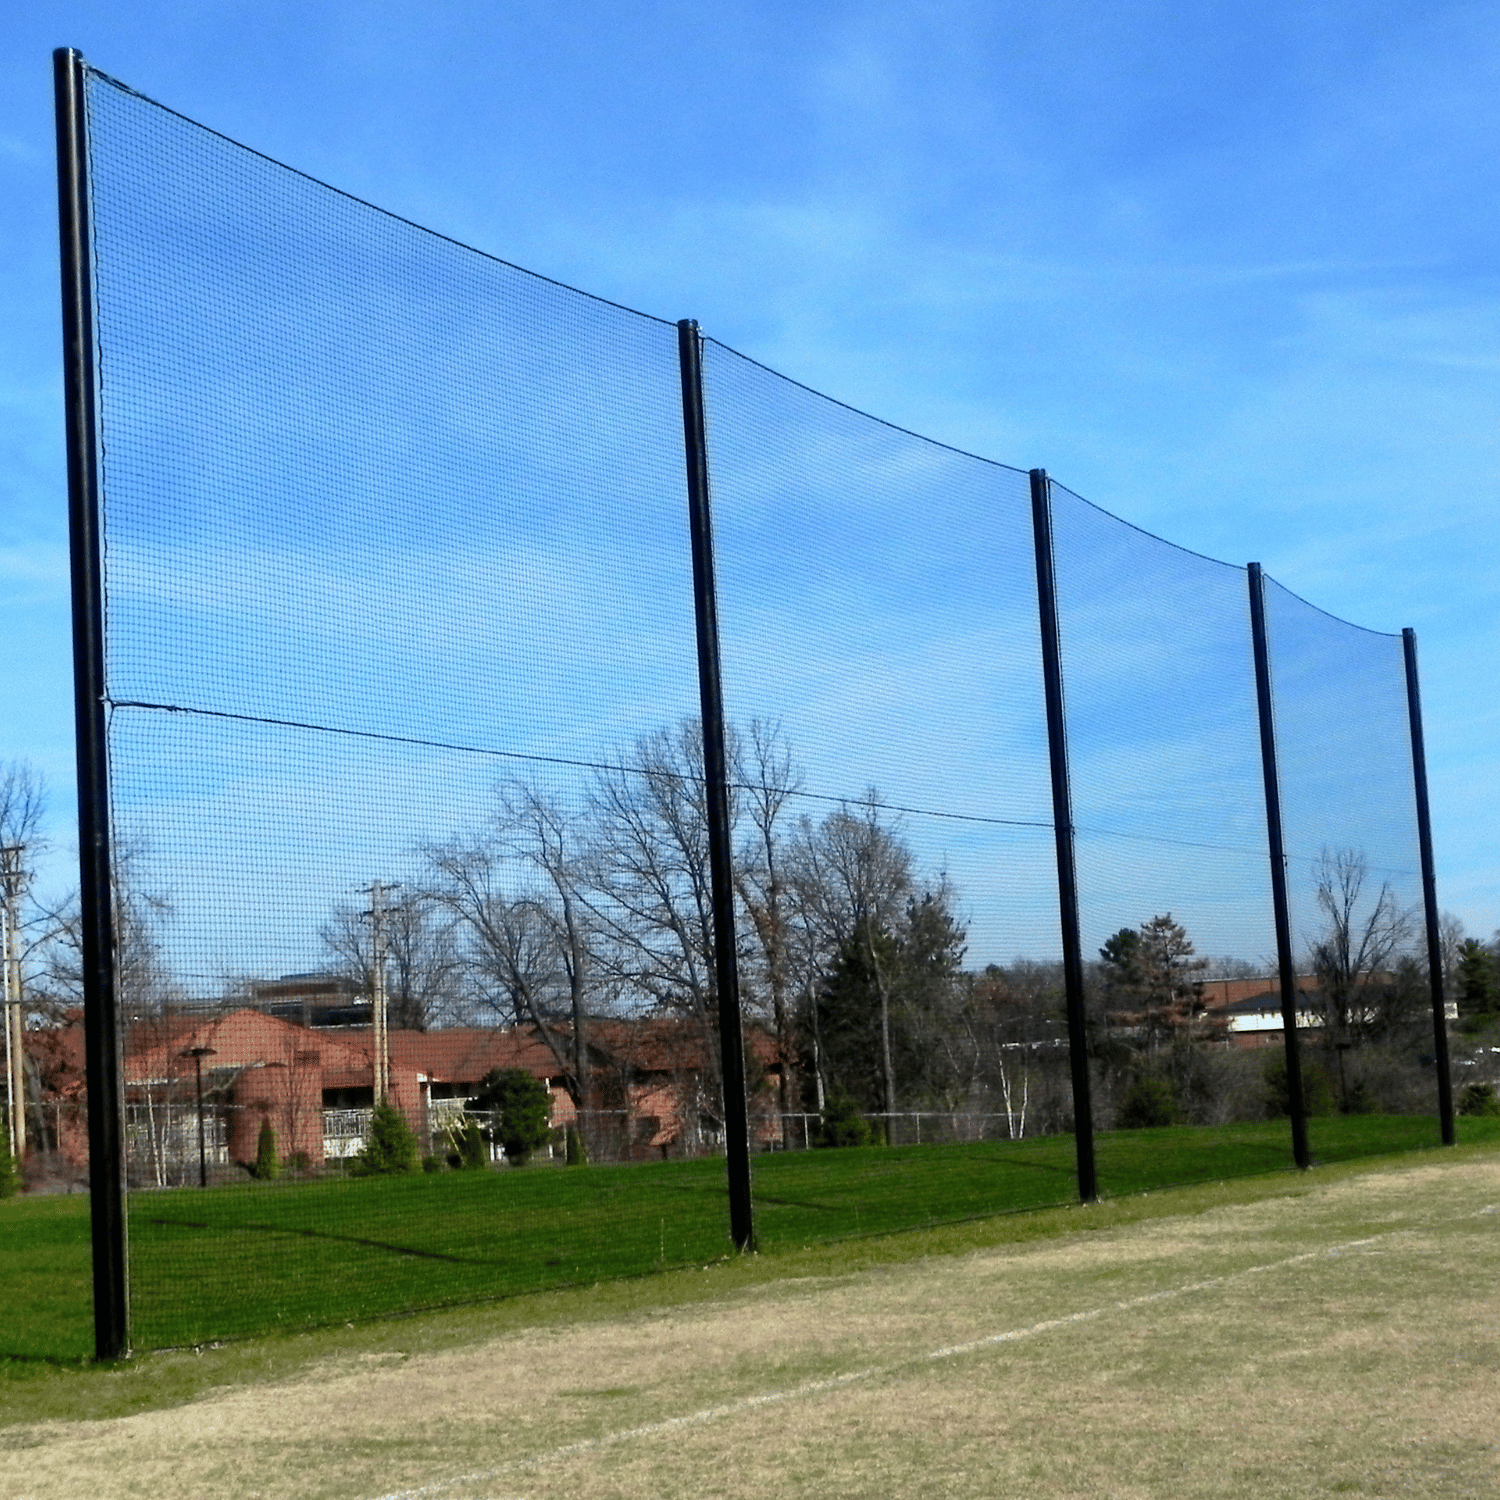 custom baseball field netting solution to keep balls from flying into the crowd